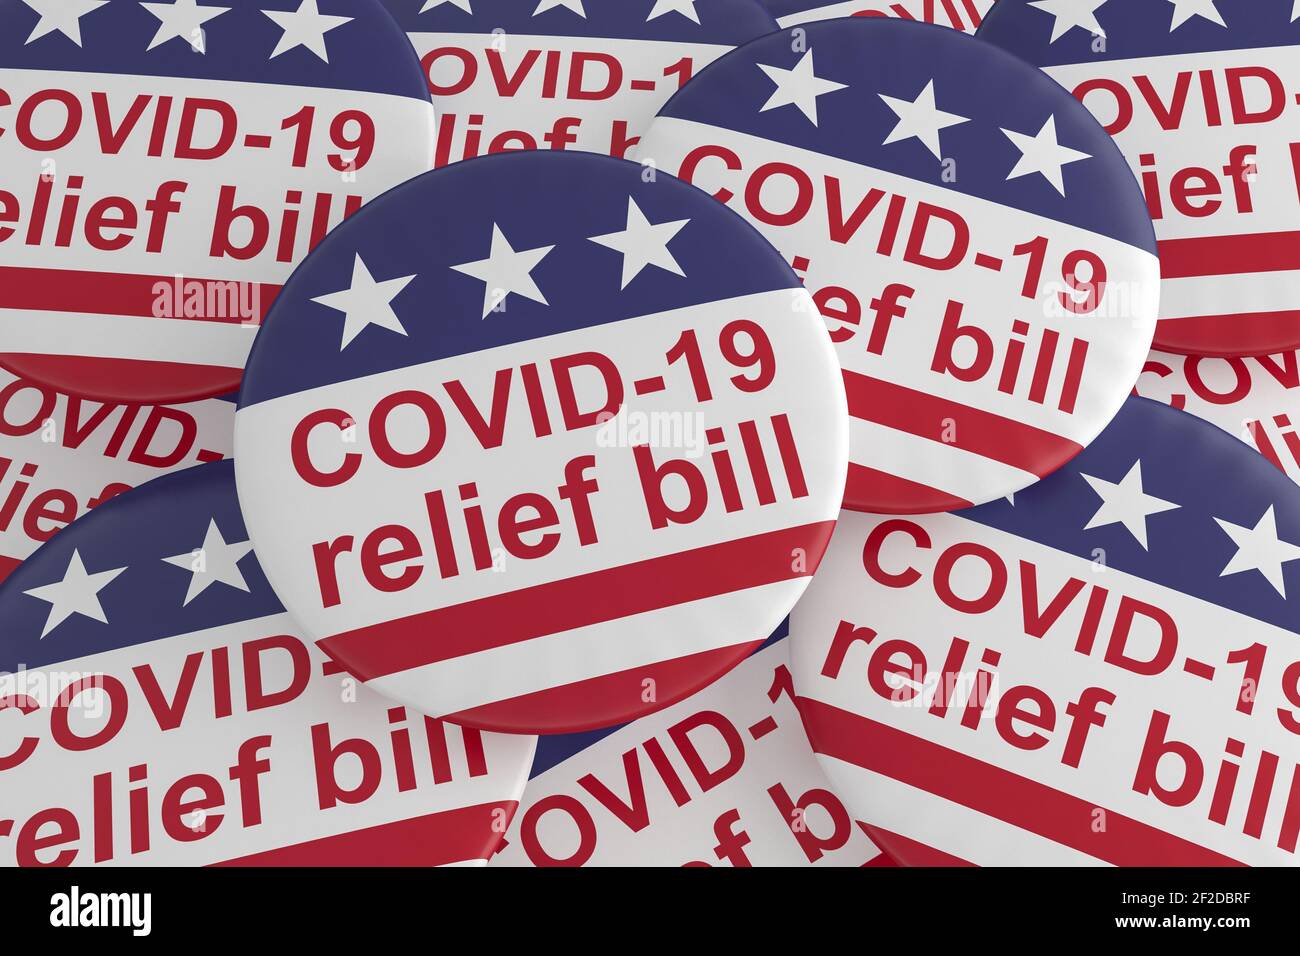 Pile of COVID-19 Relief Bill Buttons With US Flag, 3d illustration Stock Photo